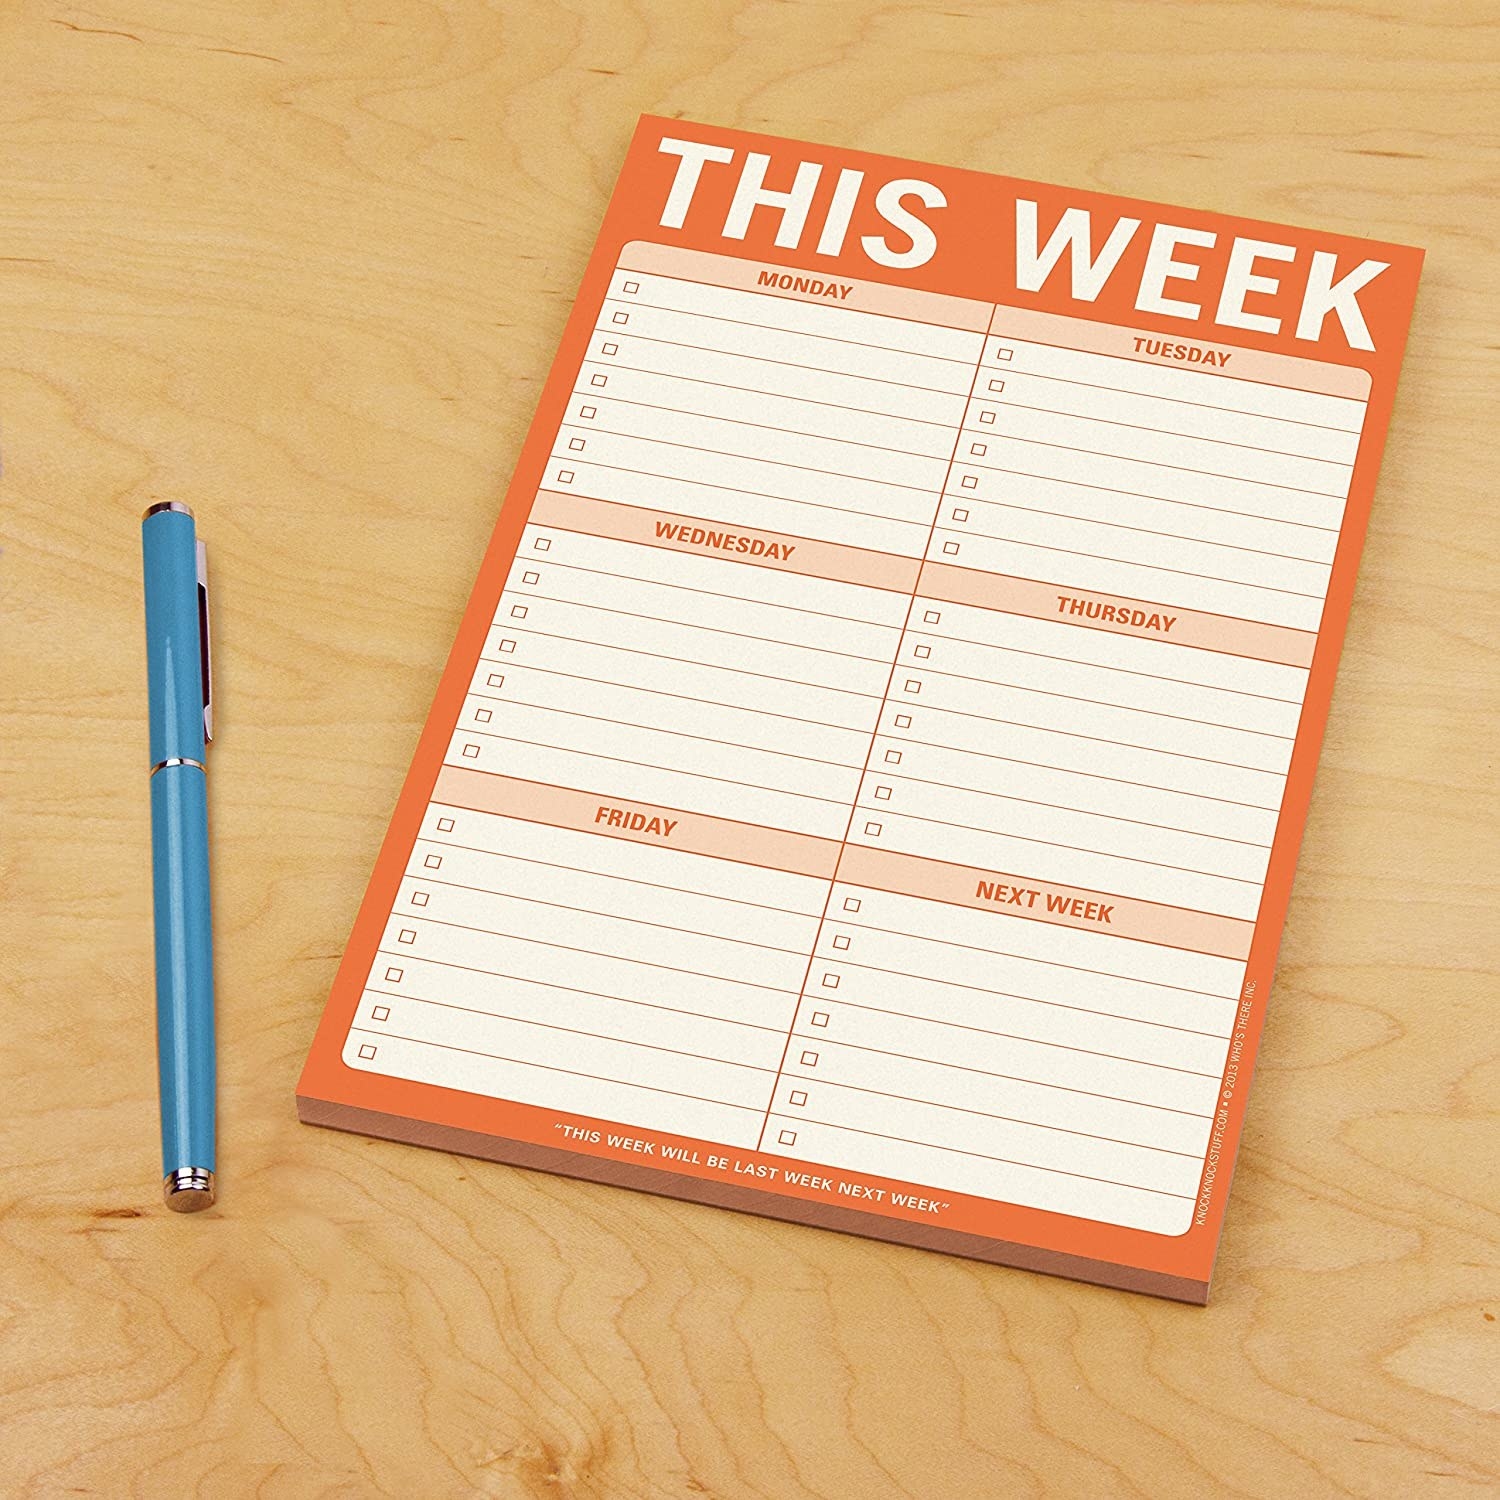 A notepad with space to write under for each weekday and next week's goals 